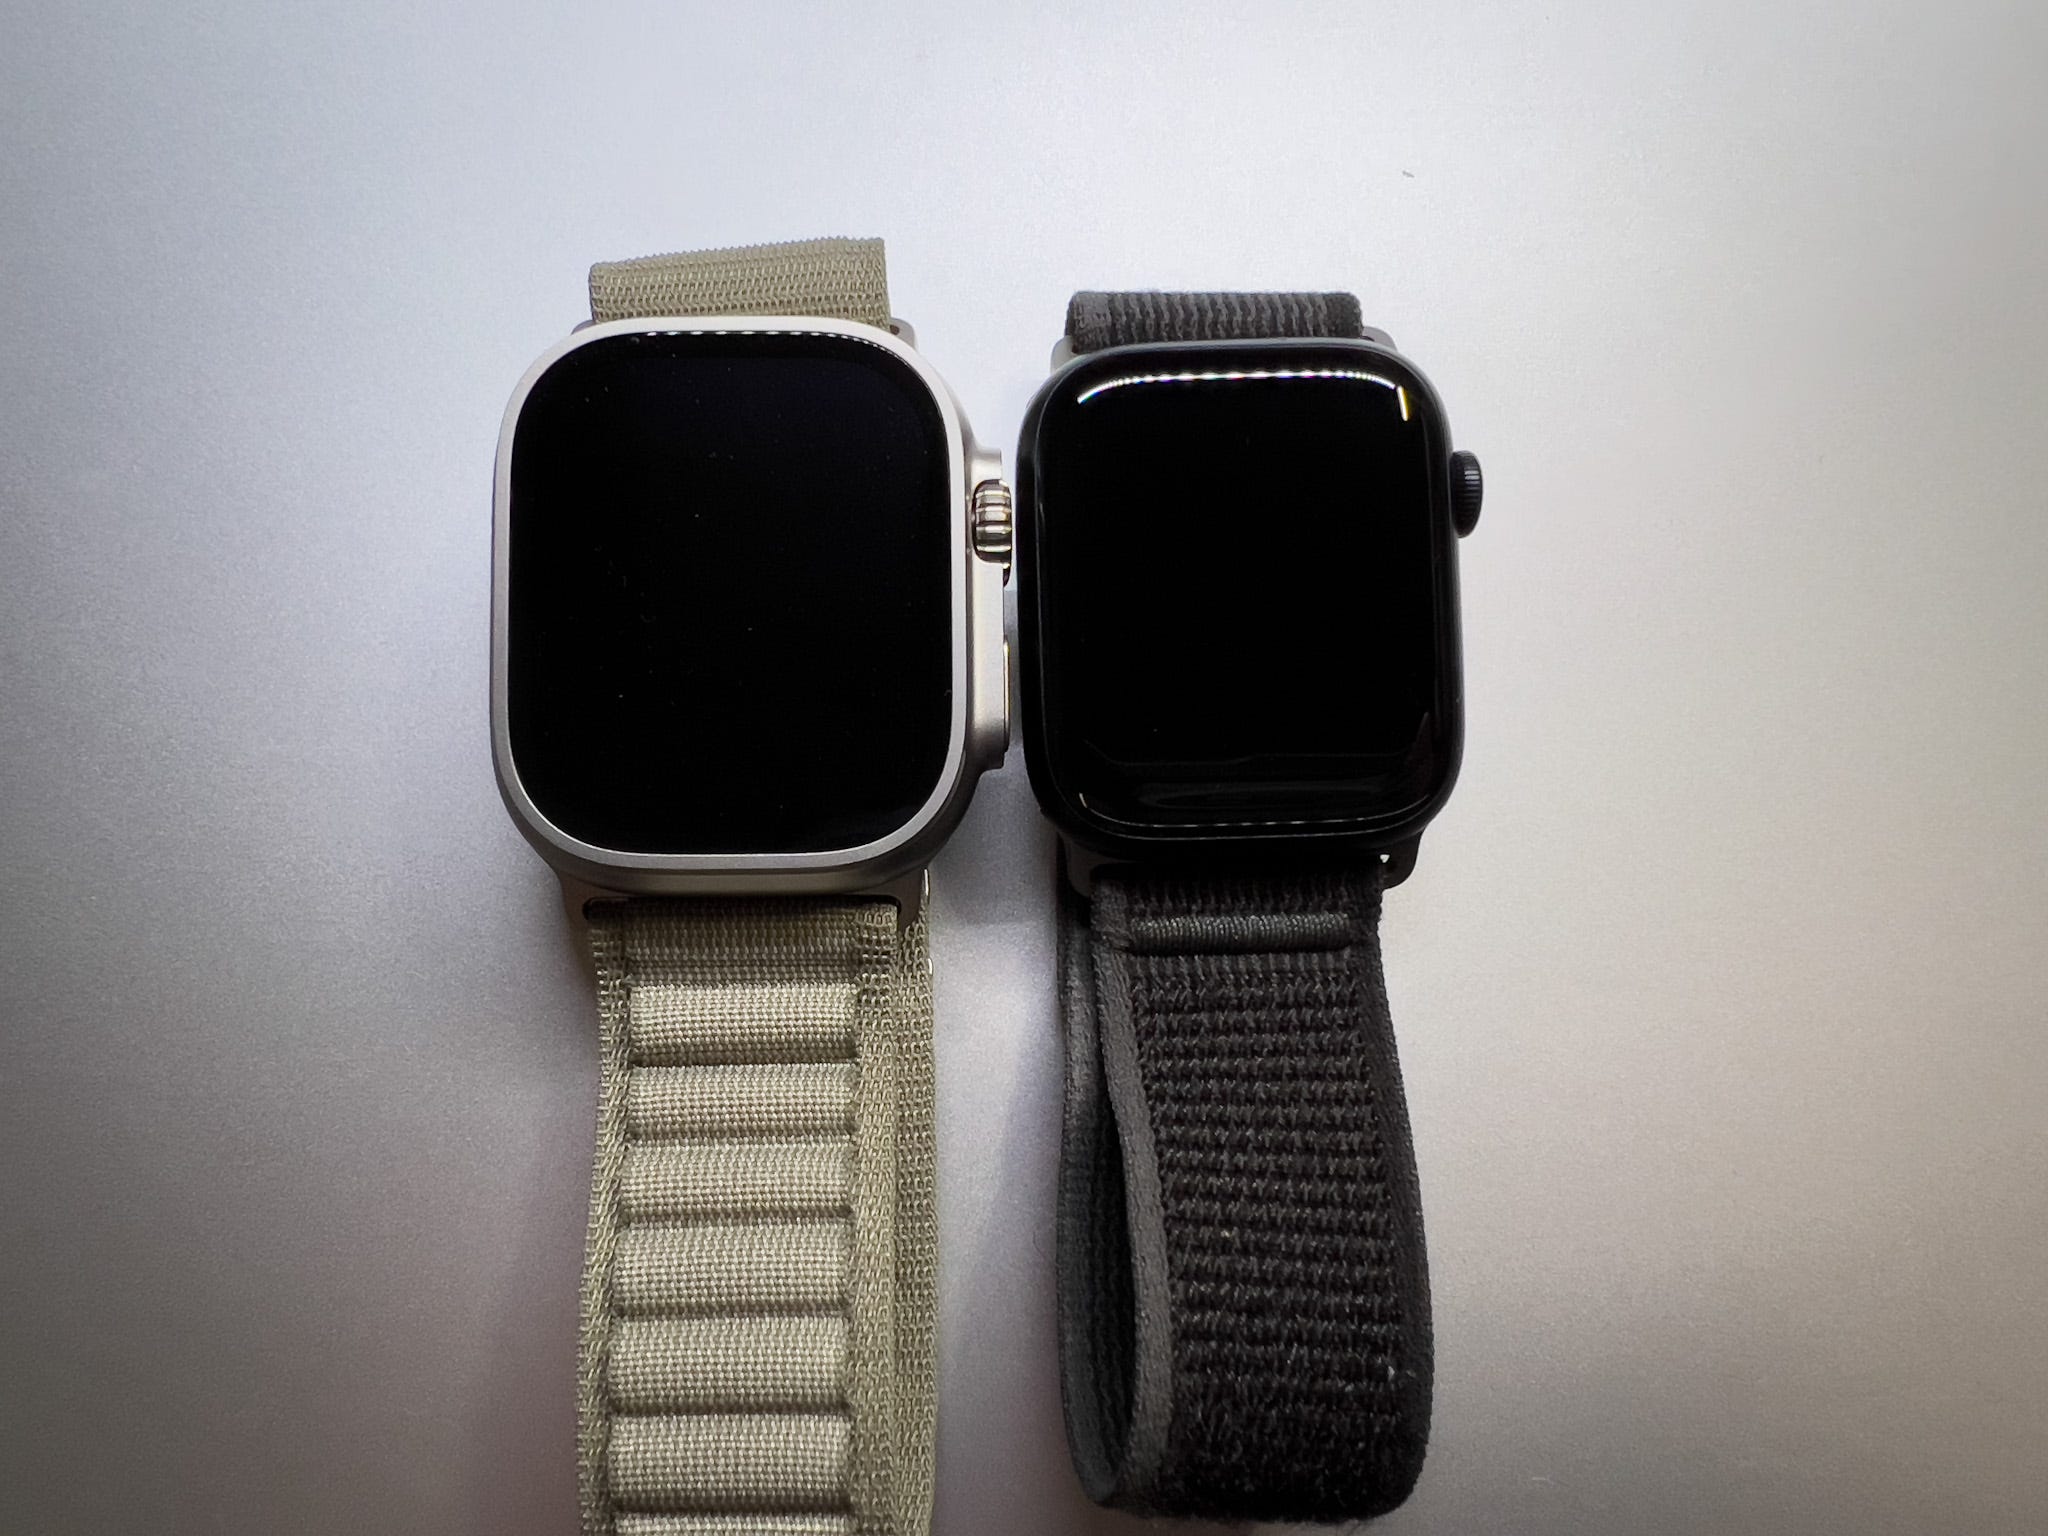 Apple Watch Ultra 2 first impressions: A brighter future for Siri